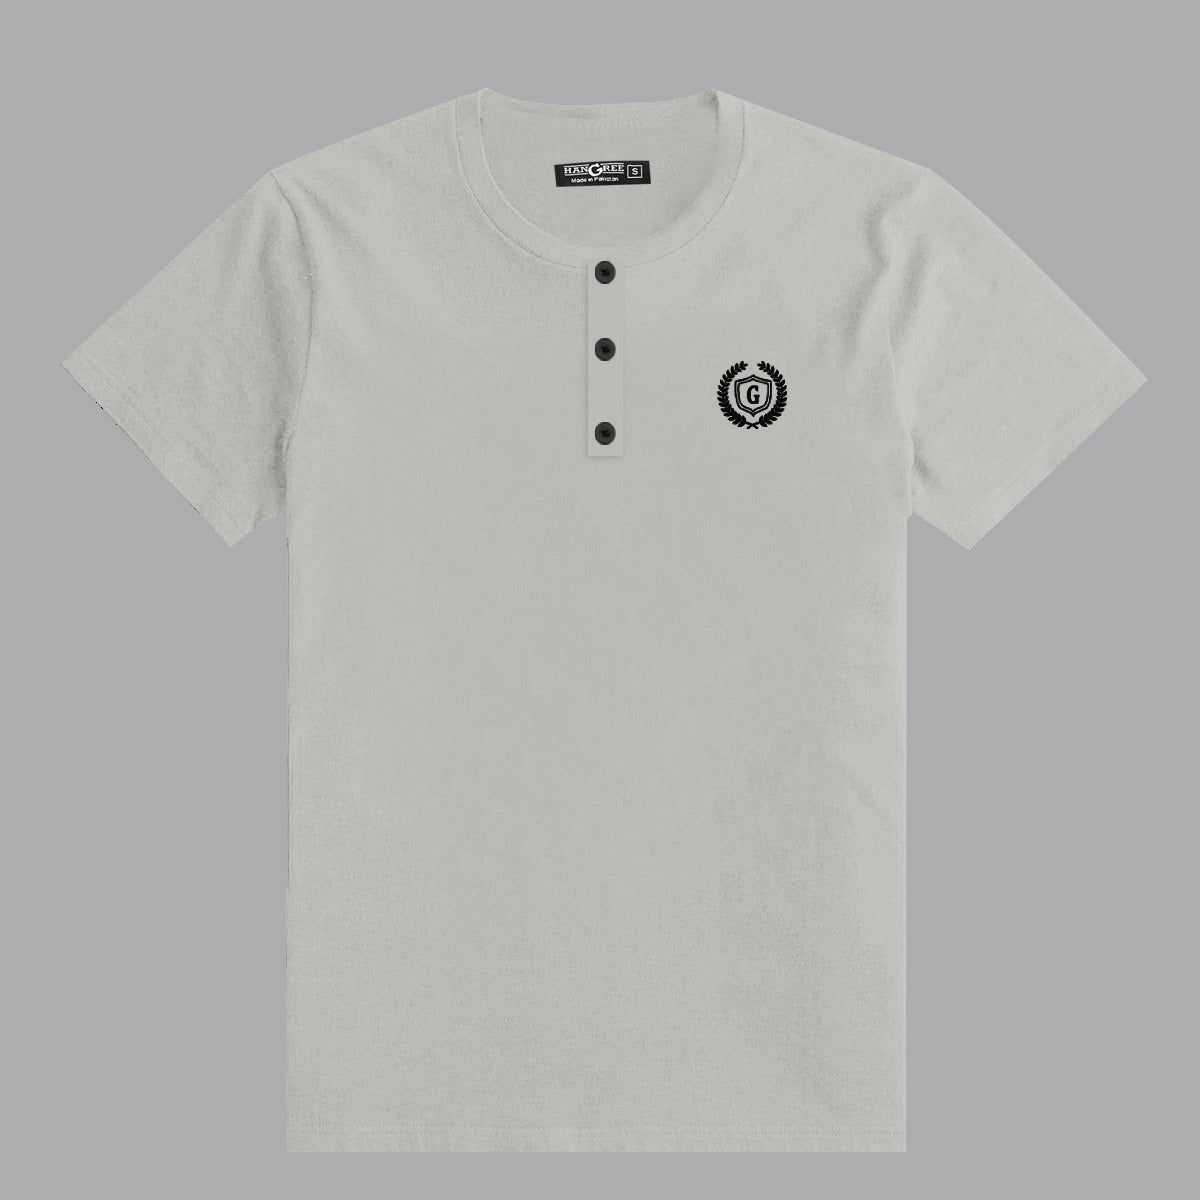 HG SIGNATURE EMB HENLEY TEE - OFF WHITE